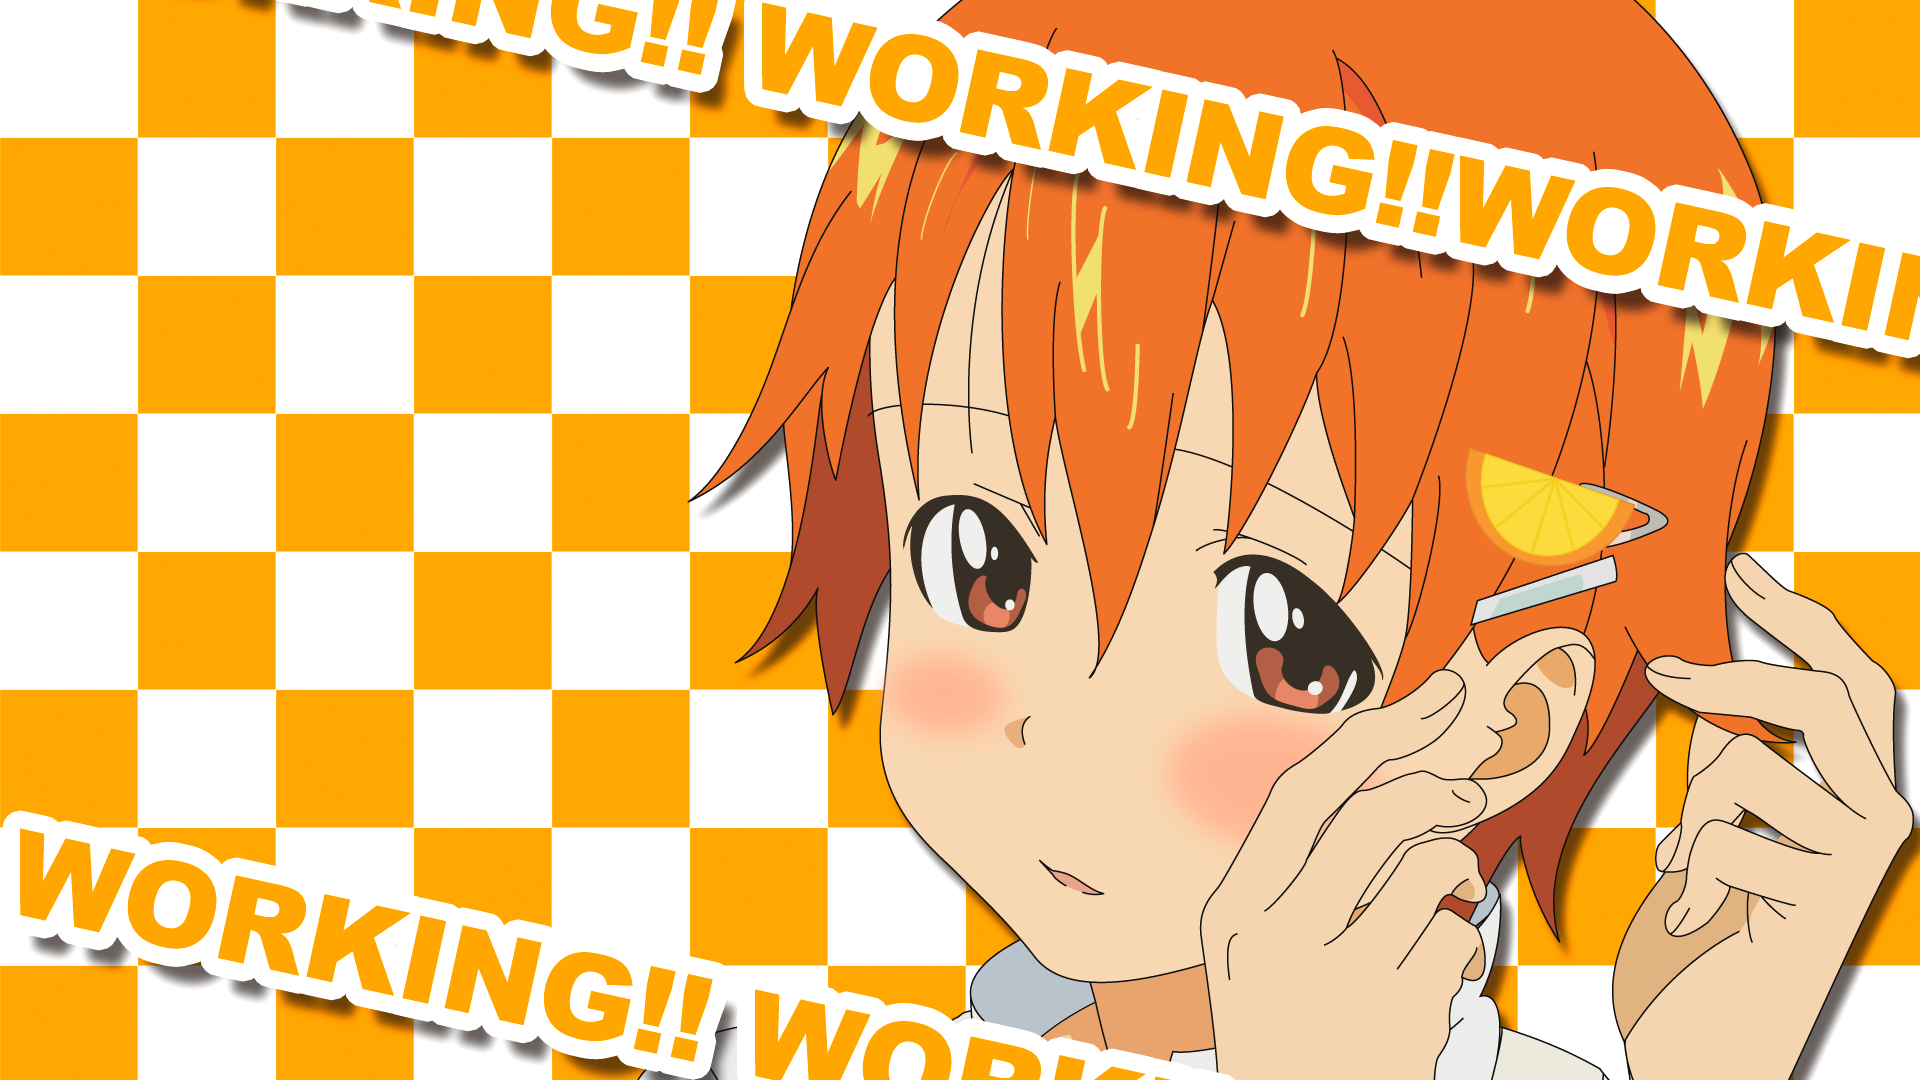 Working, inami, wallpaper, store, battery, motorcycle, image